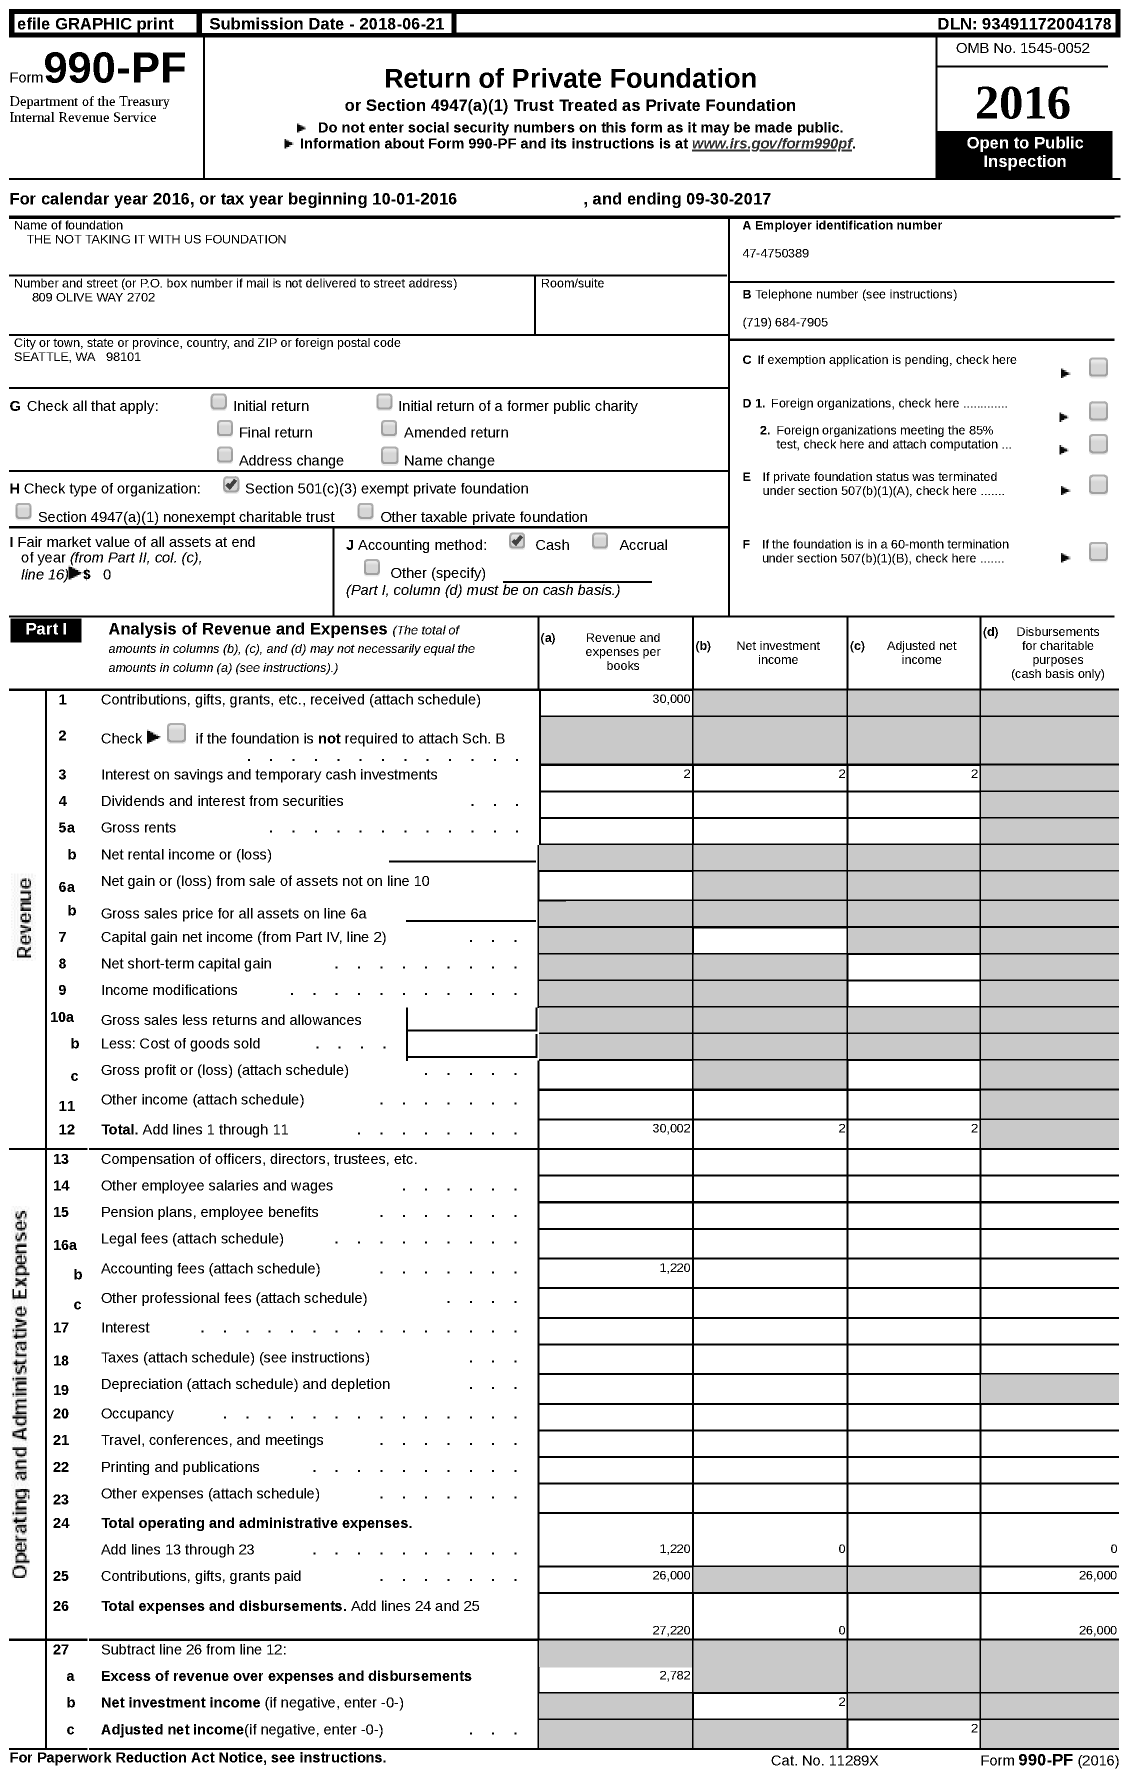 Image of first page of 2016 Form 990PF for The Not Taking It with Us Foundation